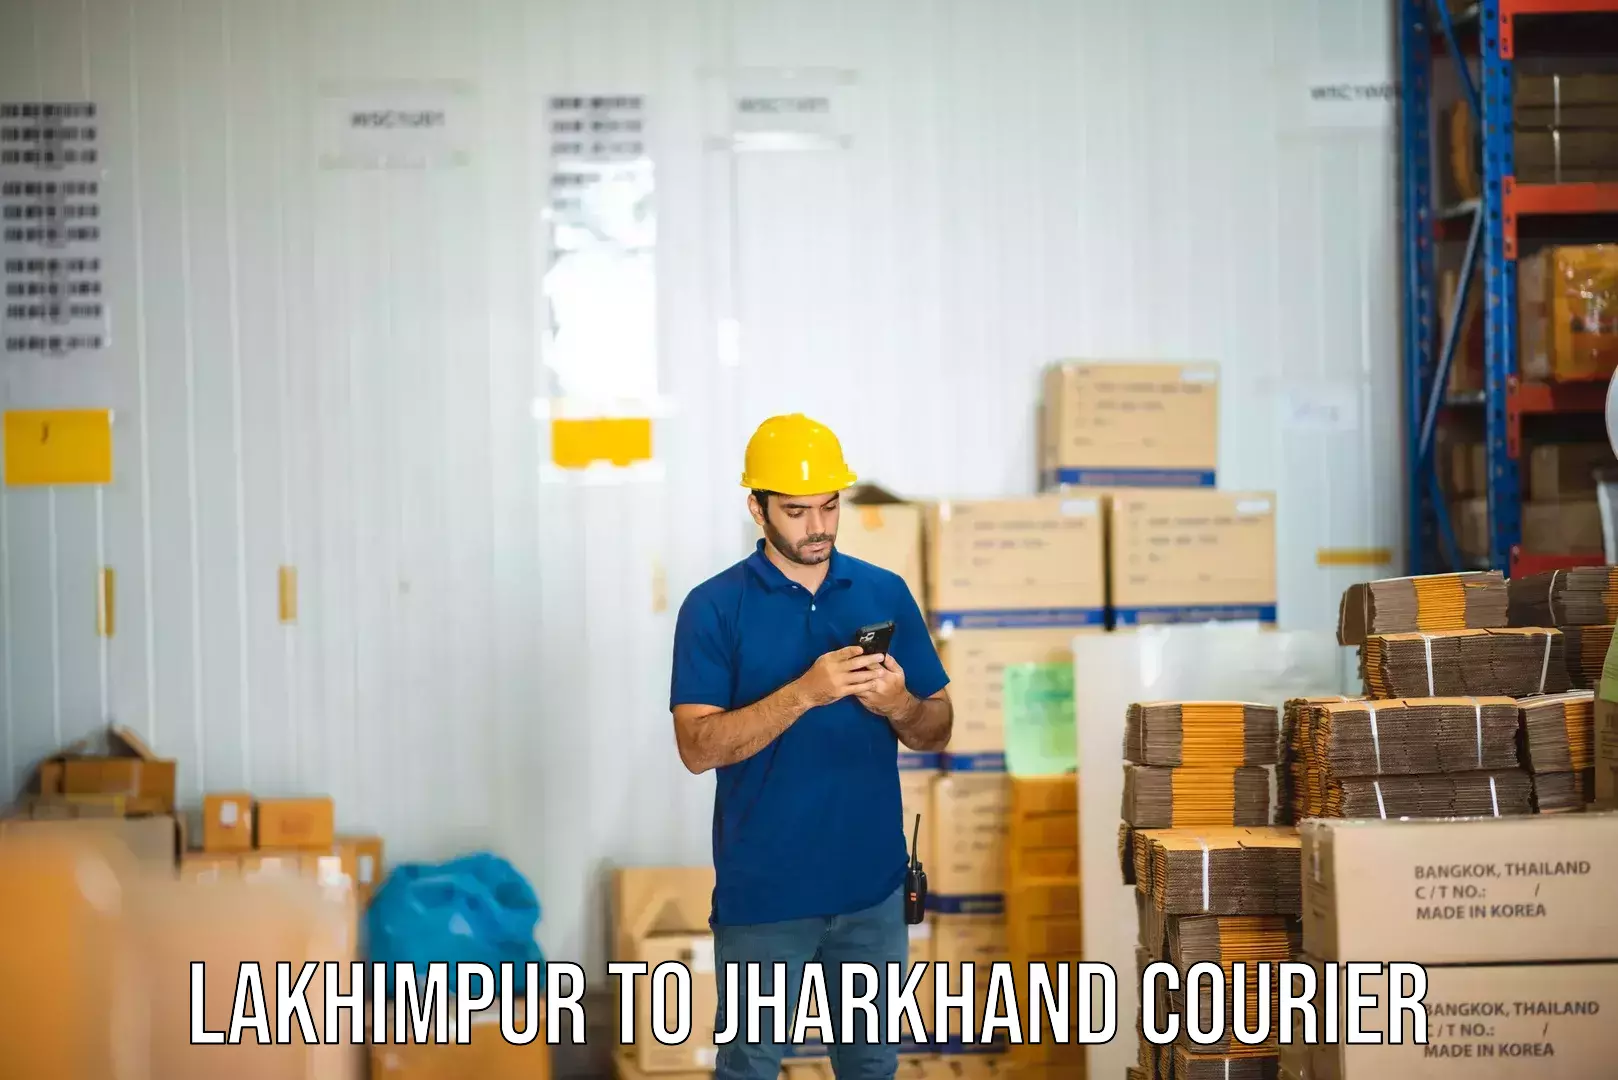 Customizable delivery plans in Lakhimpur to Medininagar